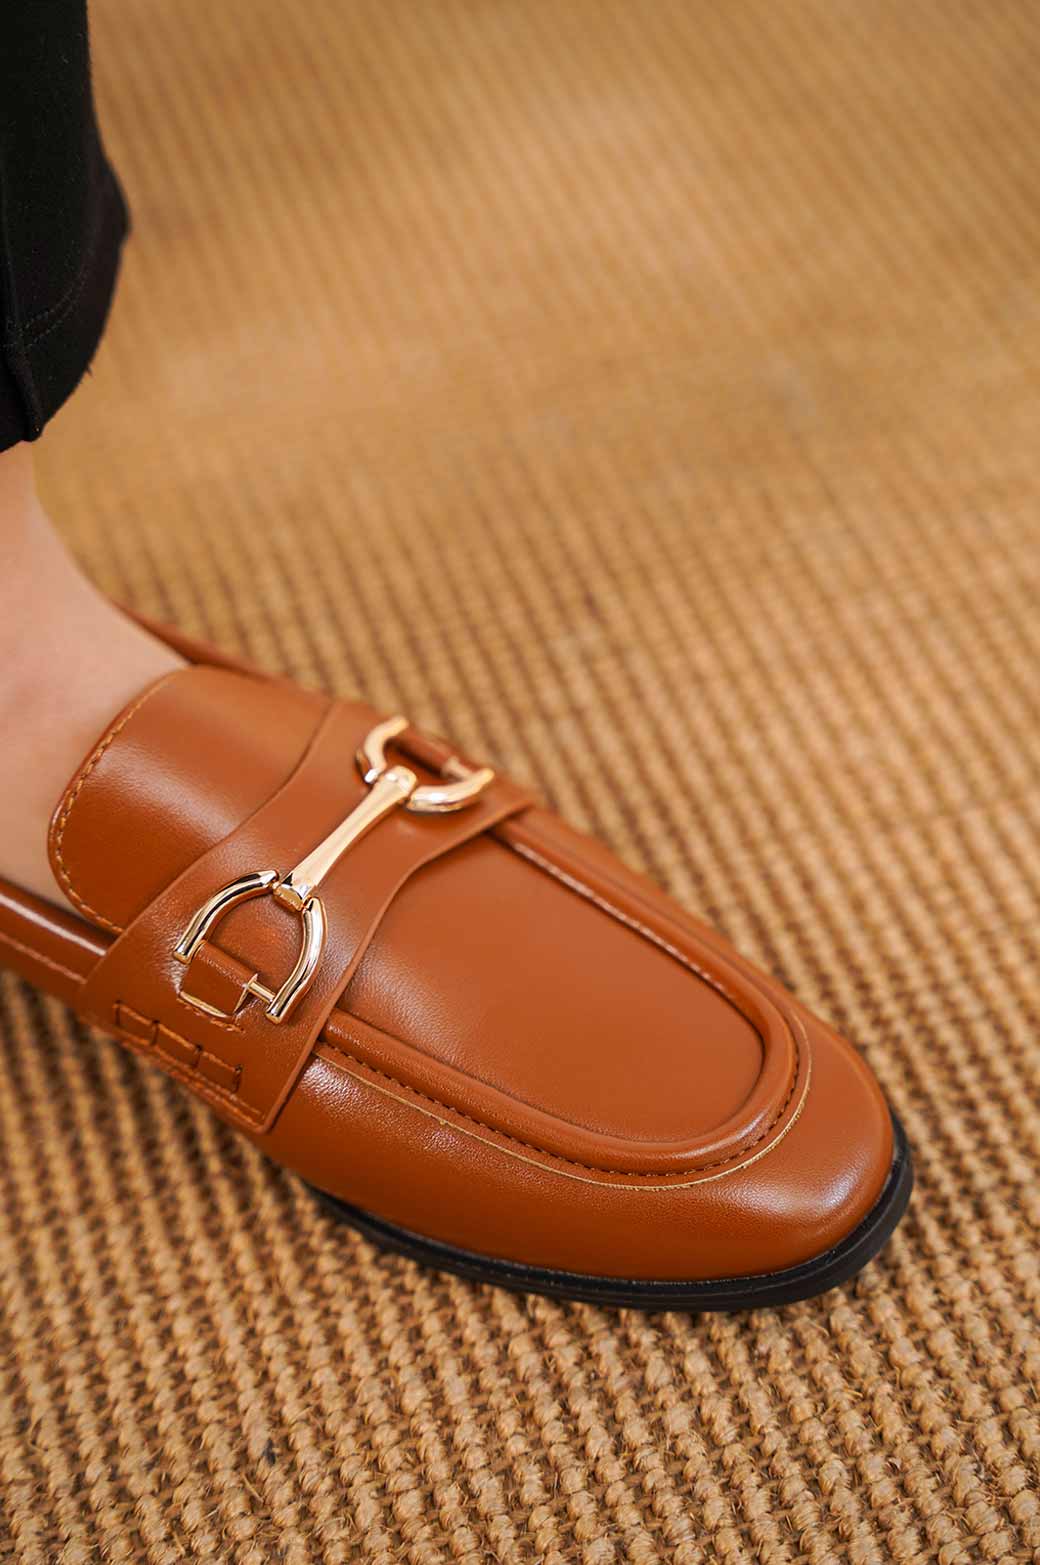 BROWN LOAFERS WITH BUCKLE